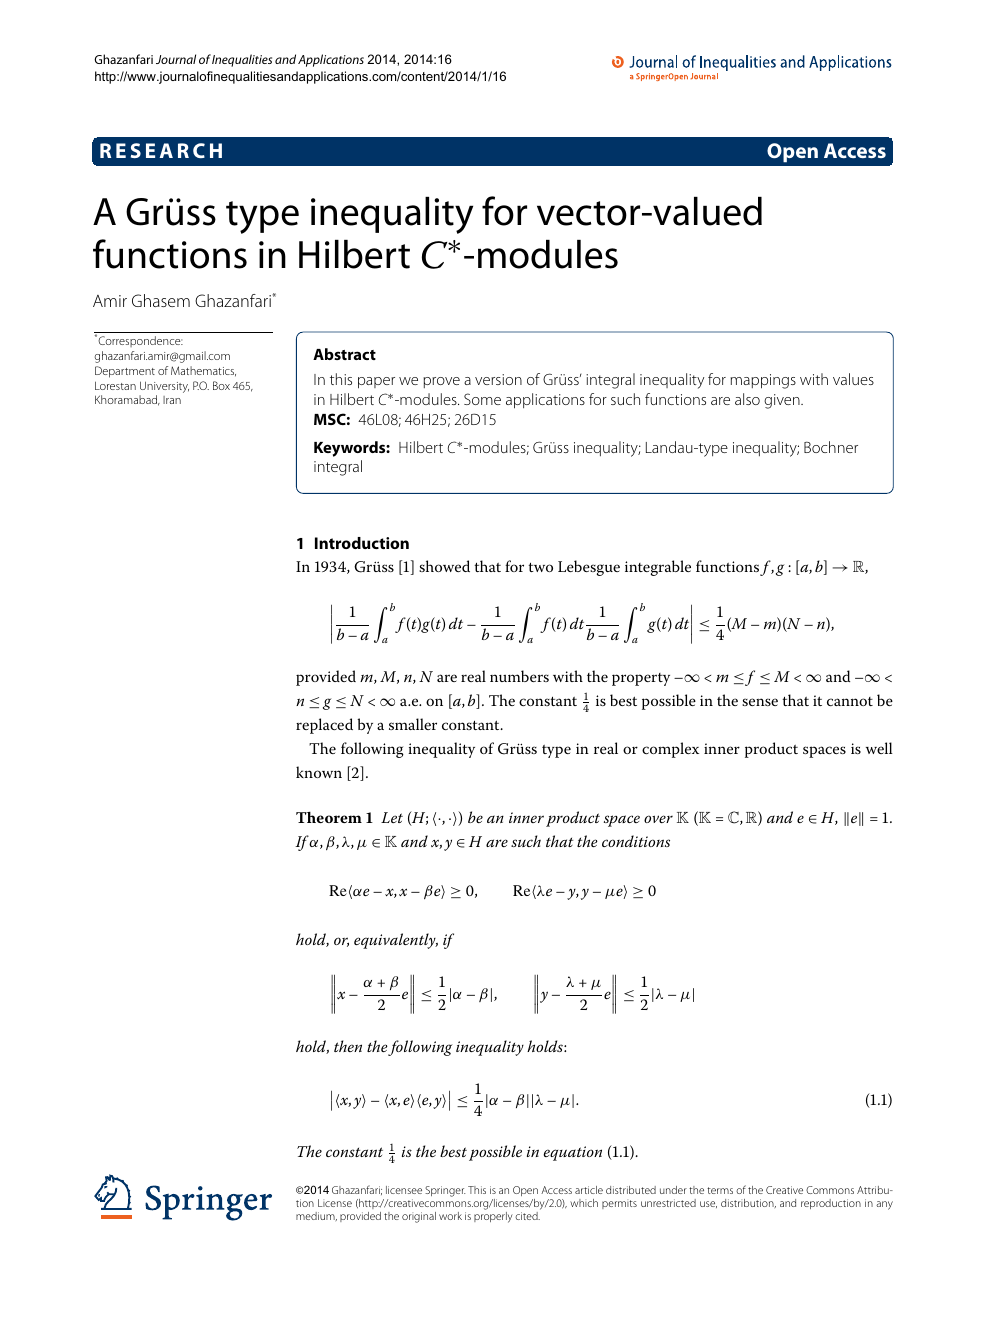 A Gruss Type Inequality For Vector Valued Functions In Hilbert C Modules Topic Of Research Paper In Mathematics Download Scholarly Article Pdf And Read For Free On Cyberleninka Open Science Hub